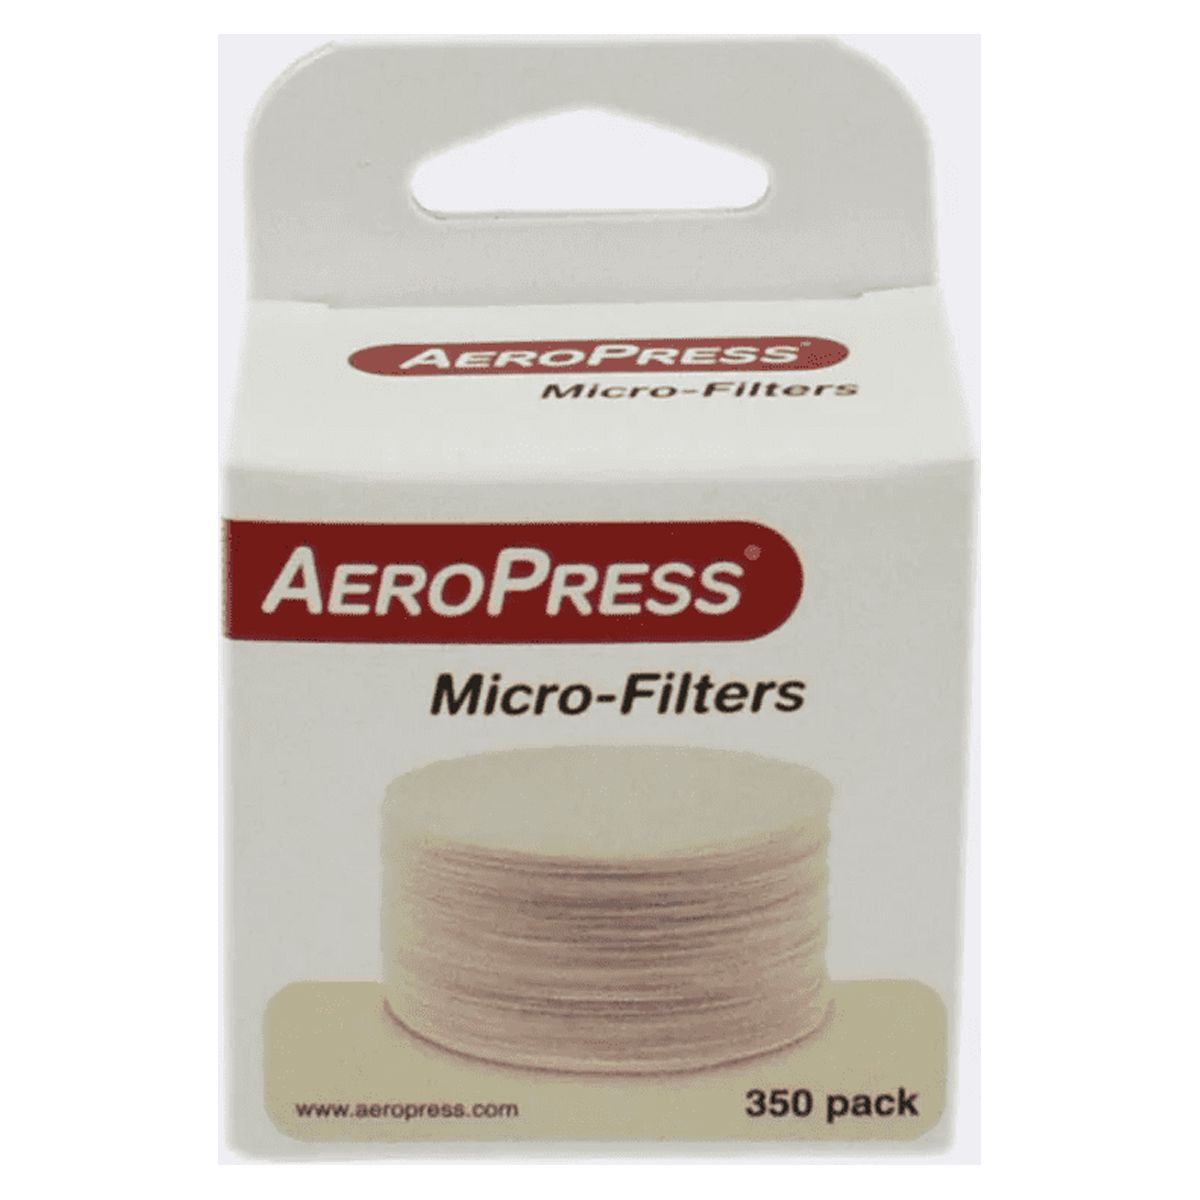 AeroPress Coffee Maker Replacement Micro-Filters, 350 Count - image 1 of 4